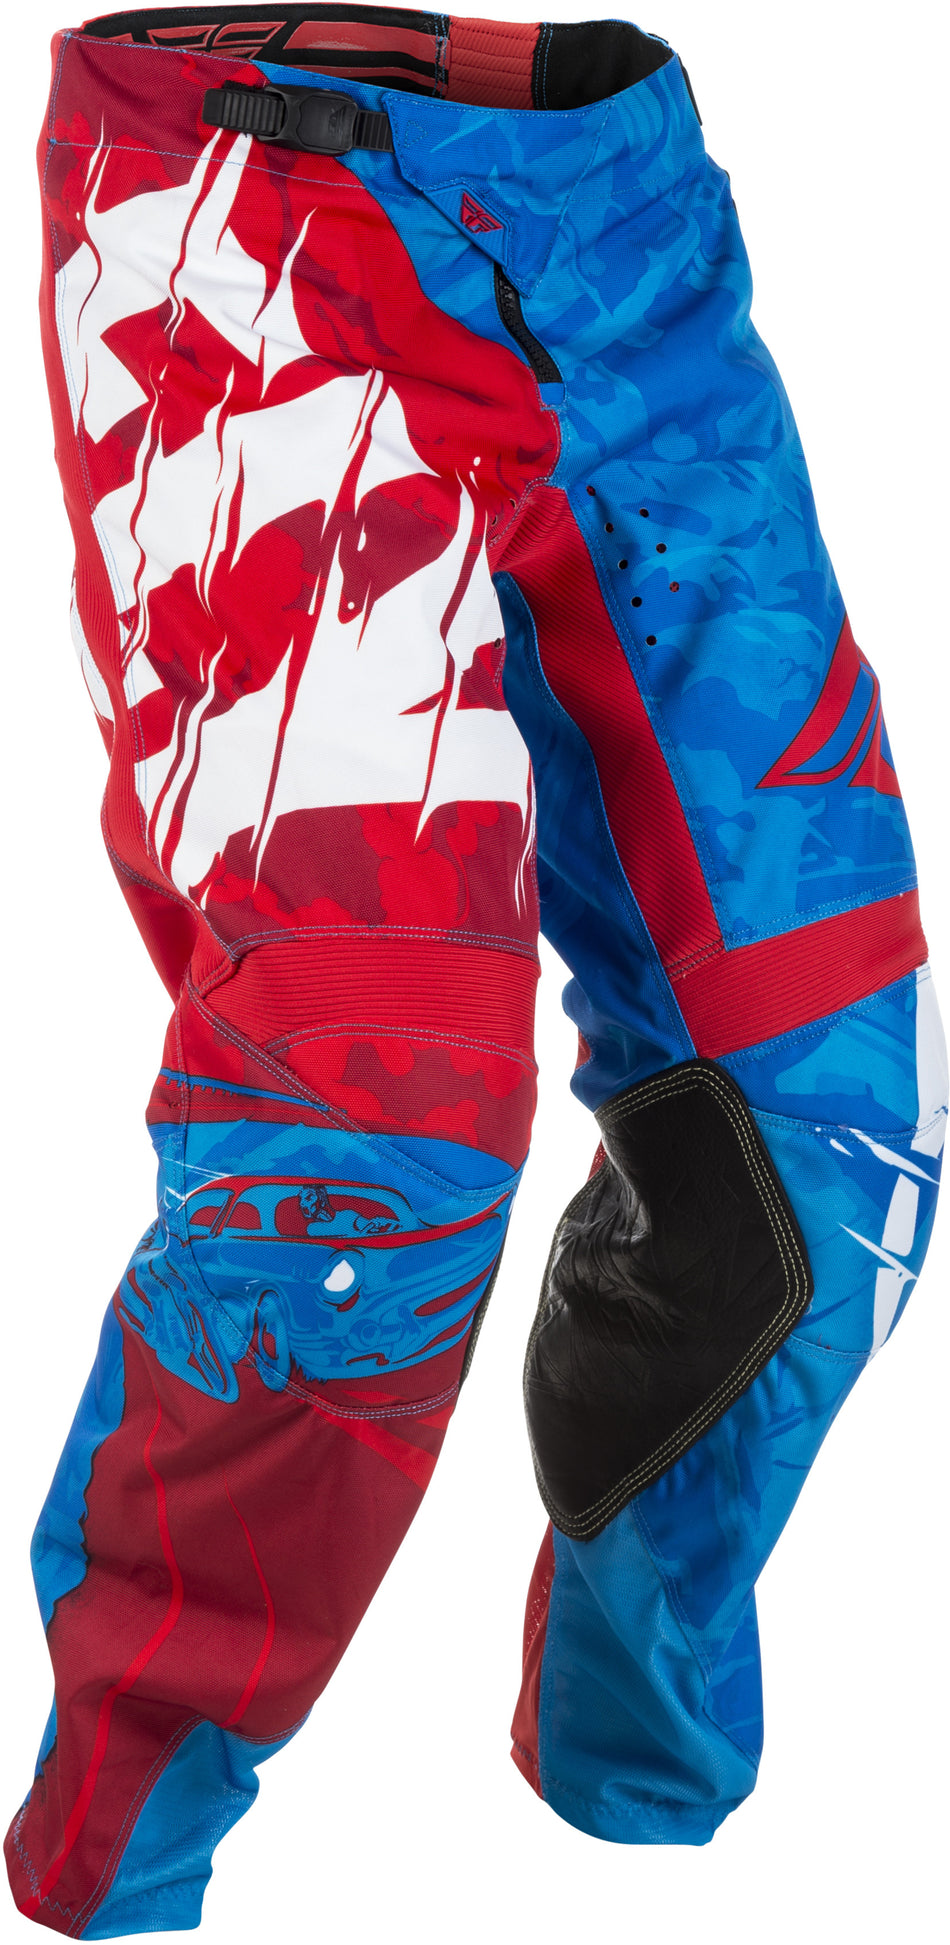 FLY RACING Kinetic Outlaw Pants Red/Blue Sz 24 371-53224